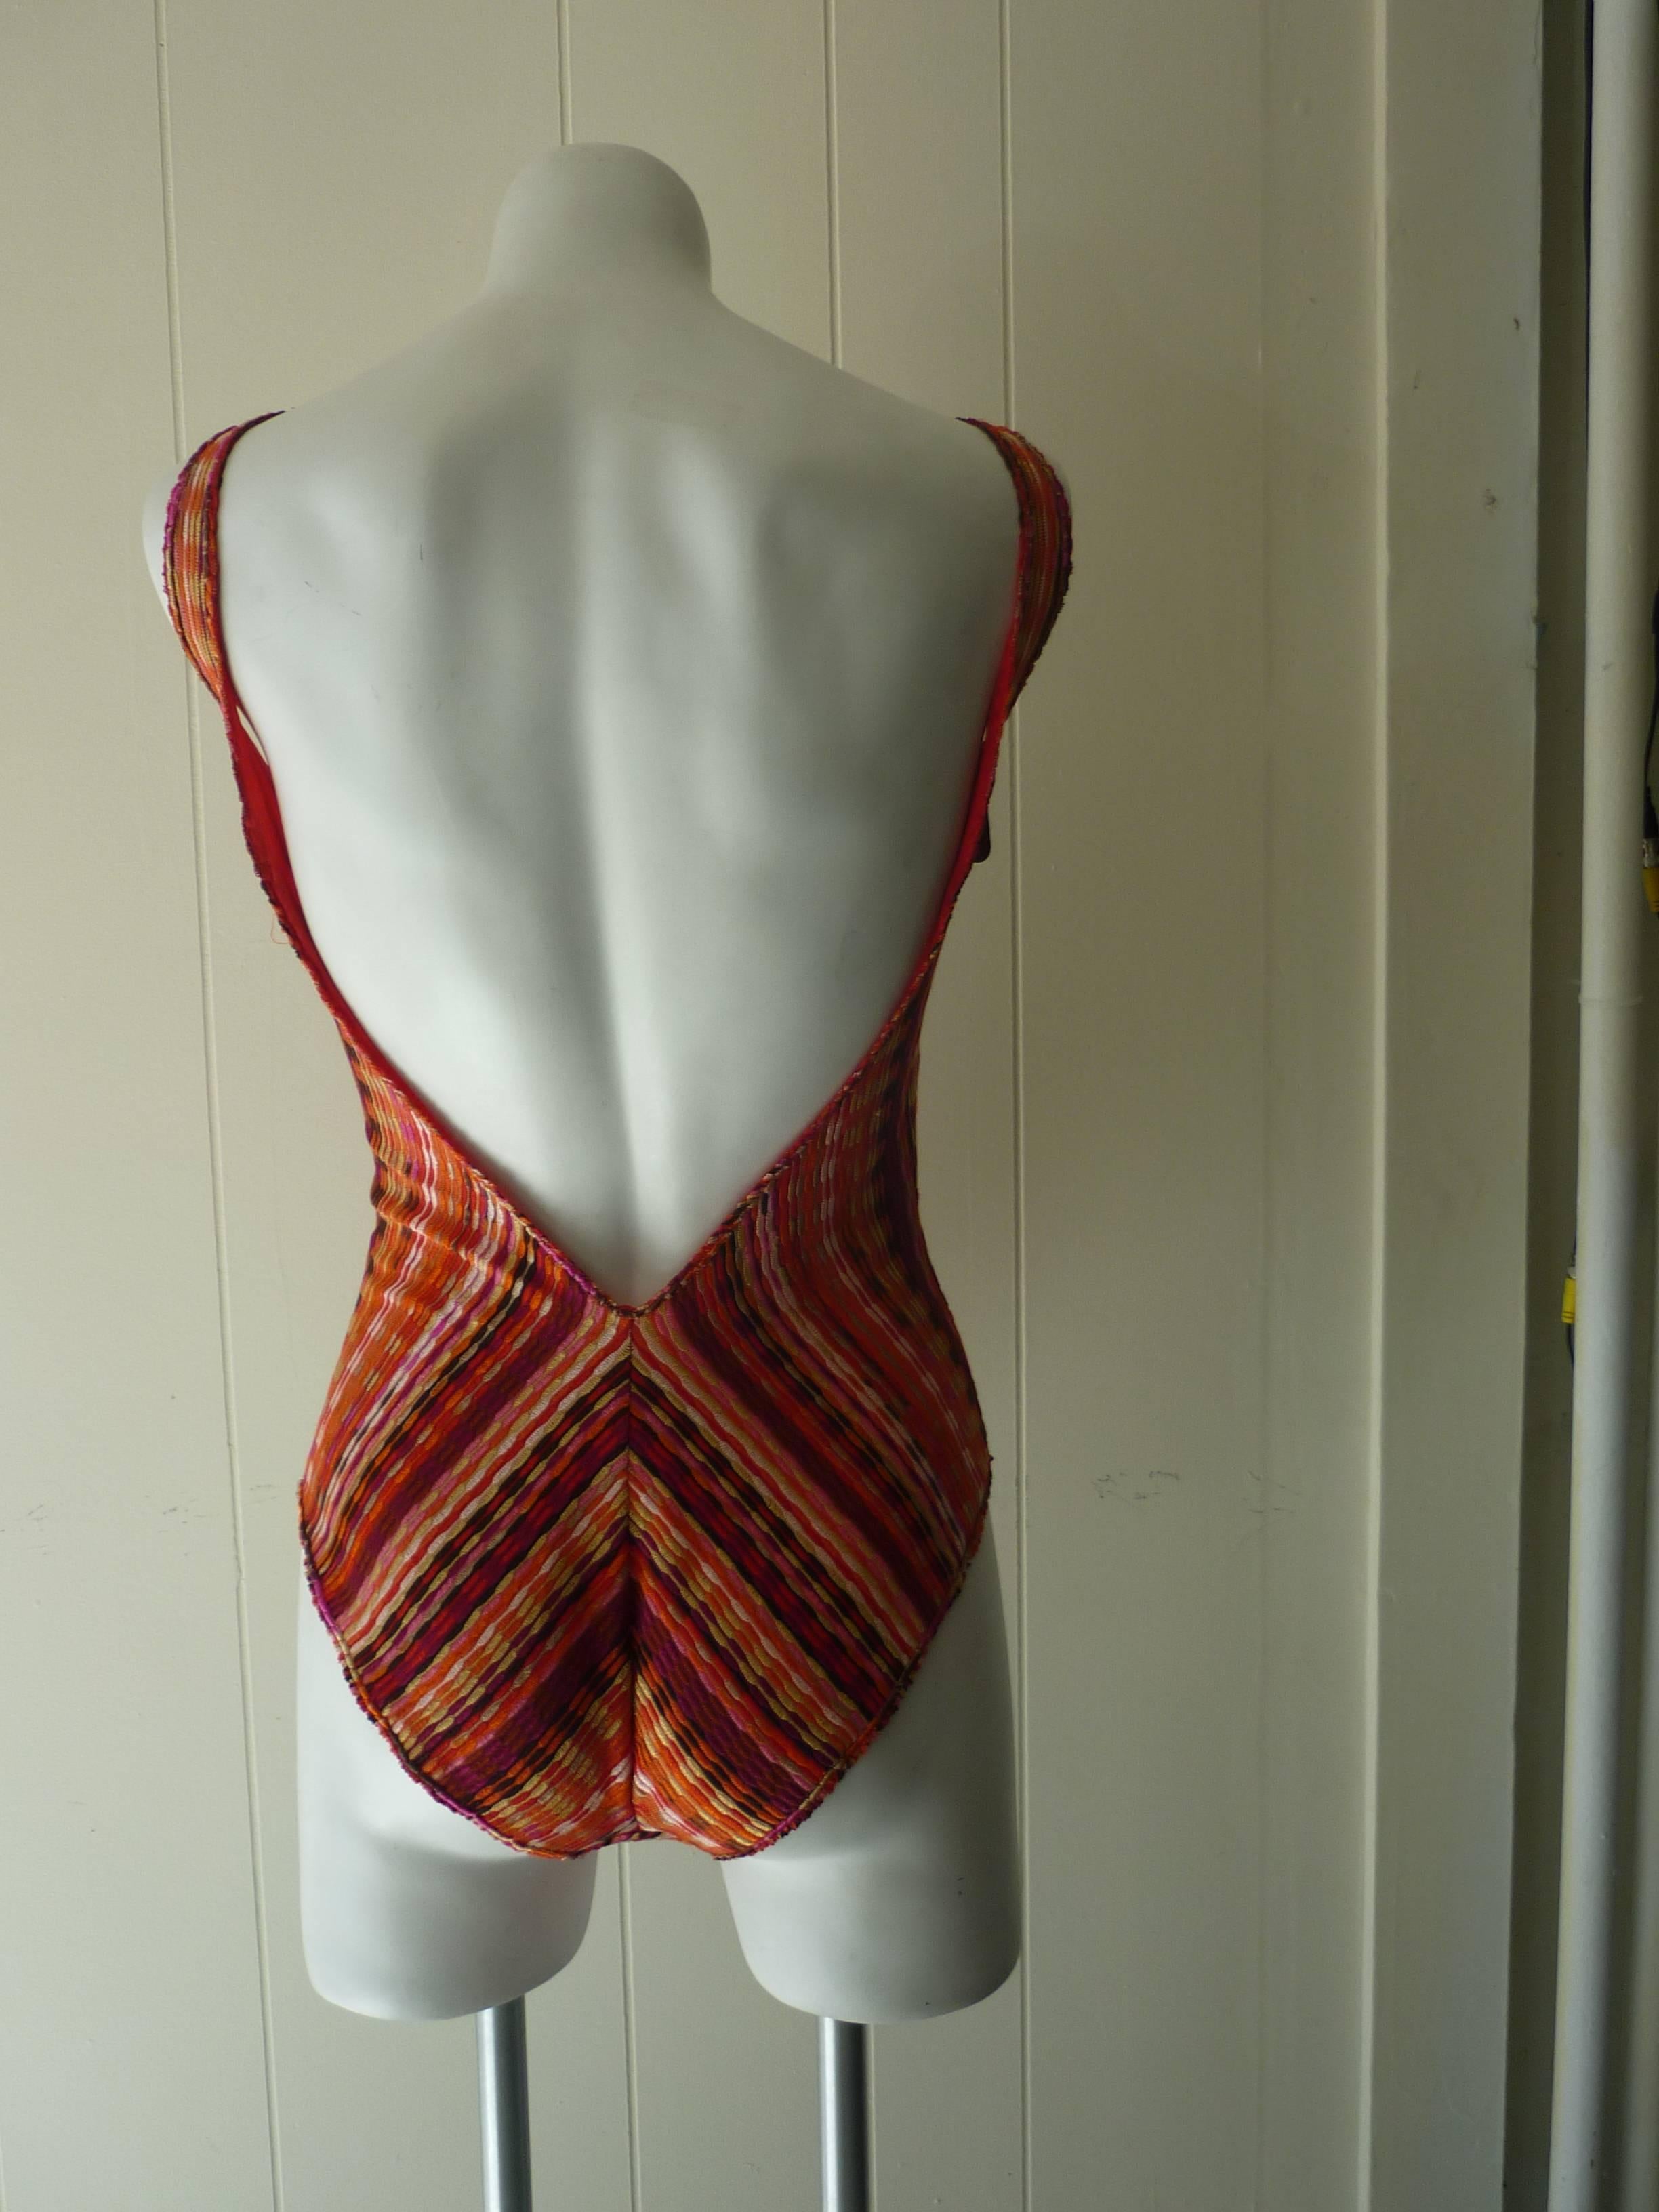 Lovely 55% viscose, 40% cotton and 5% nylon bathing suit with a low scoop back. This item is new with tags.

Bust 34